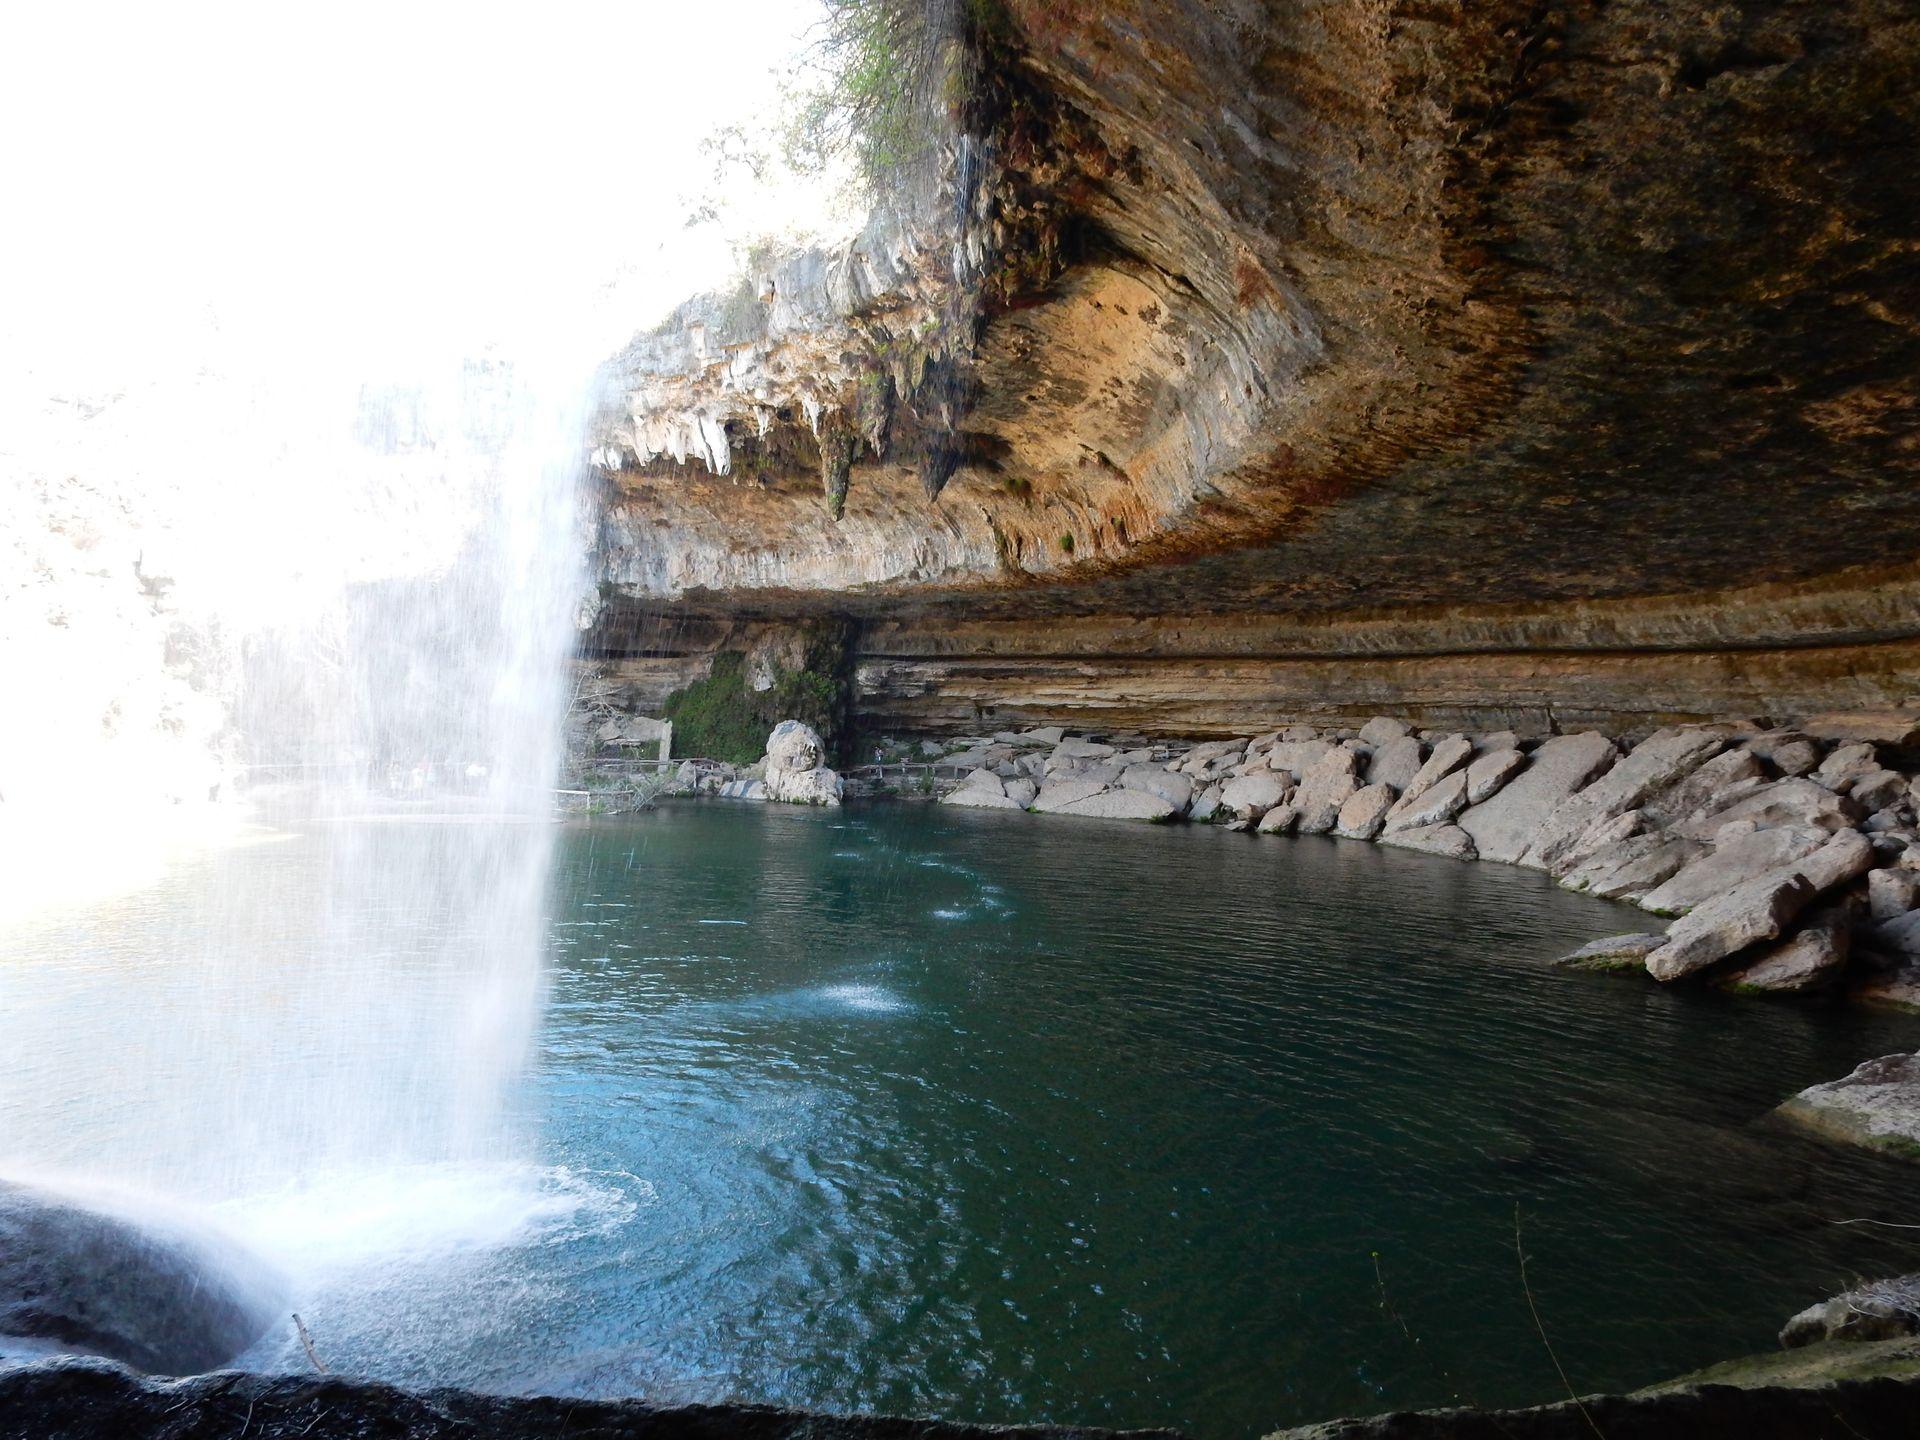 A pool of water with a cave overhanging above it. A waterfall flows down from the top of the cave and into the pool below.